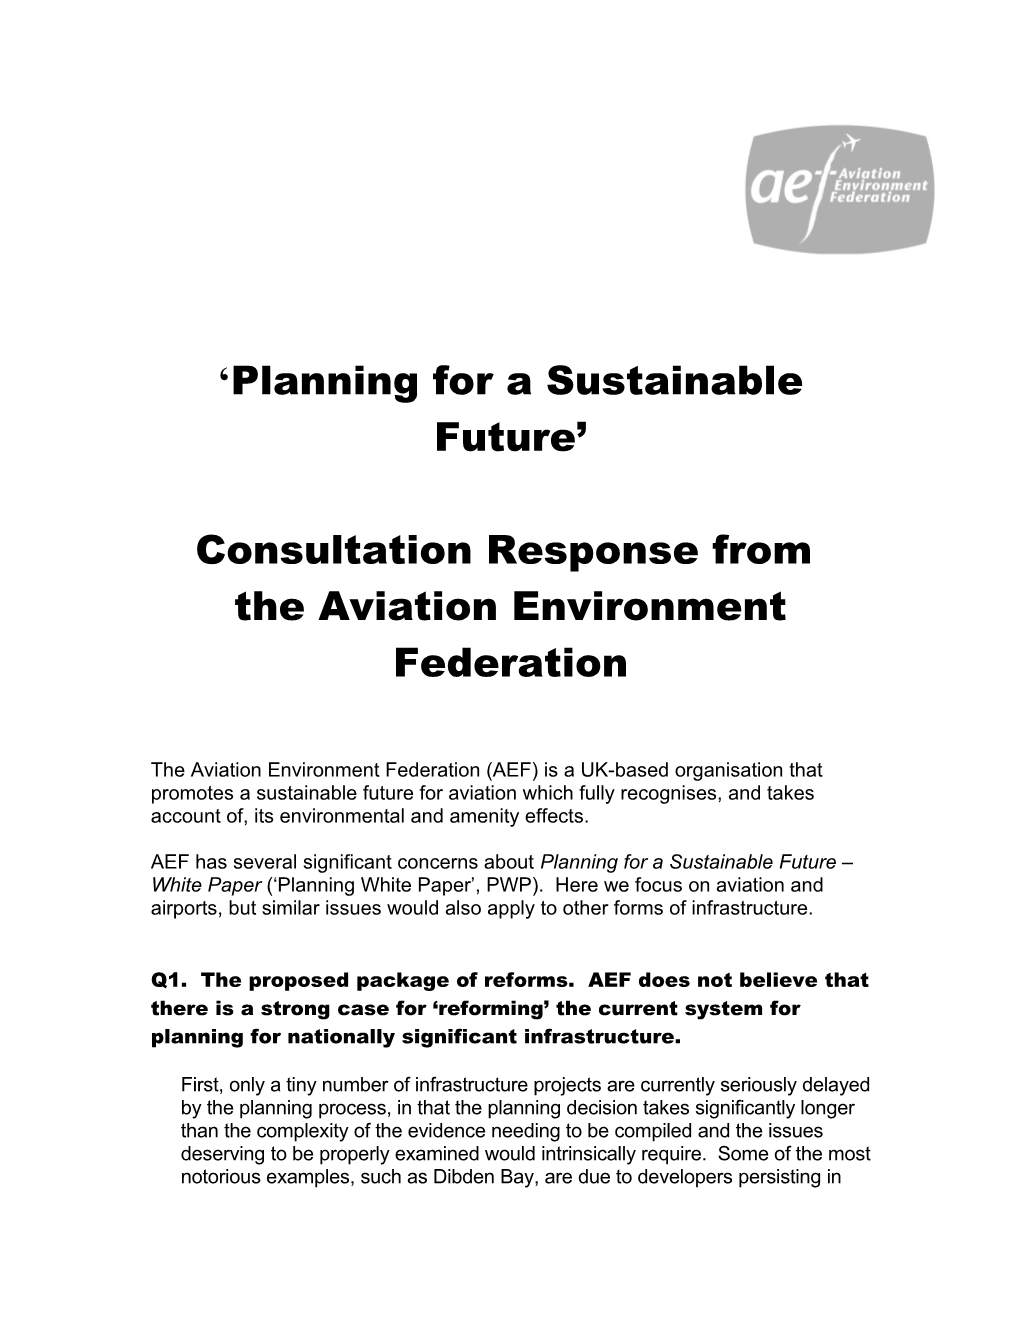 The Aviation Environment Federation (AEF) Is A UK-Based Organisation That Promotes A Sustainable Future For Aviation Which Ful